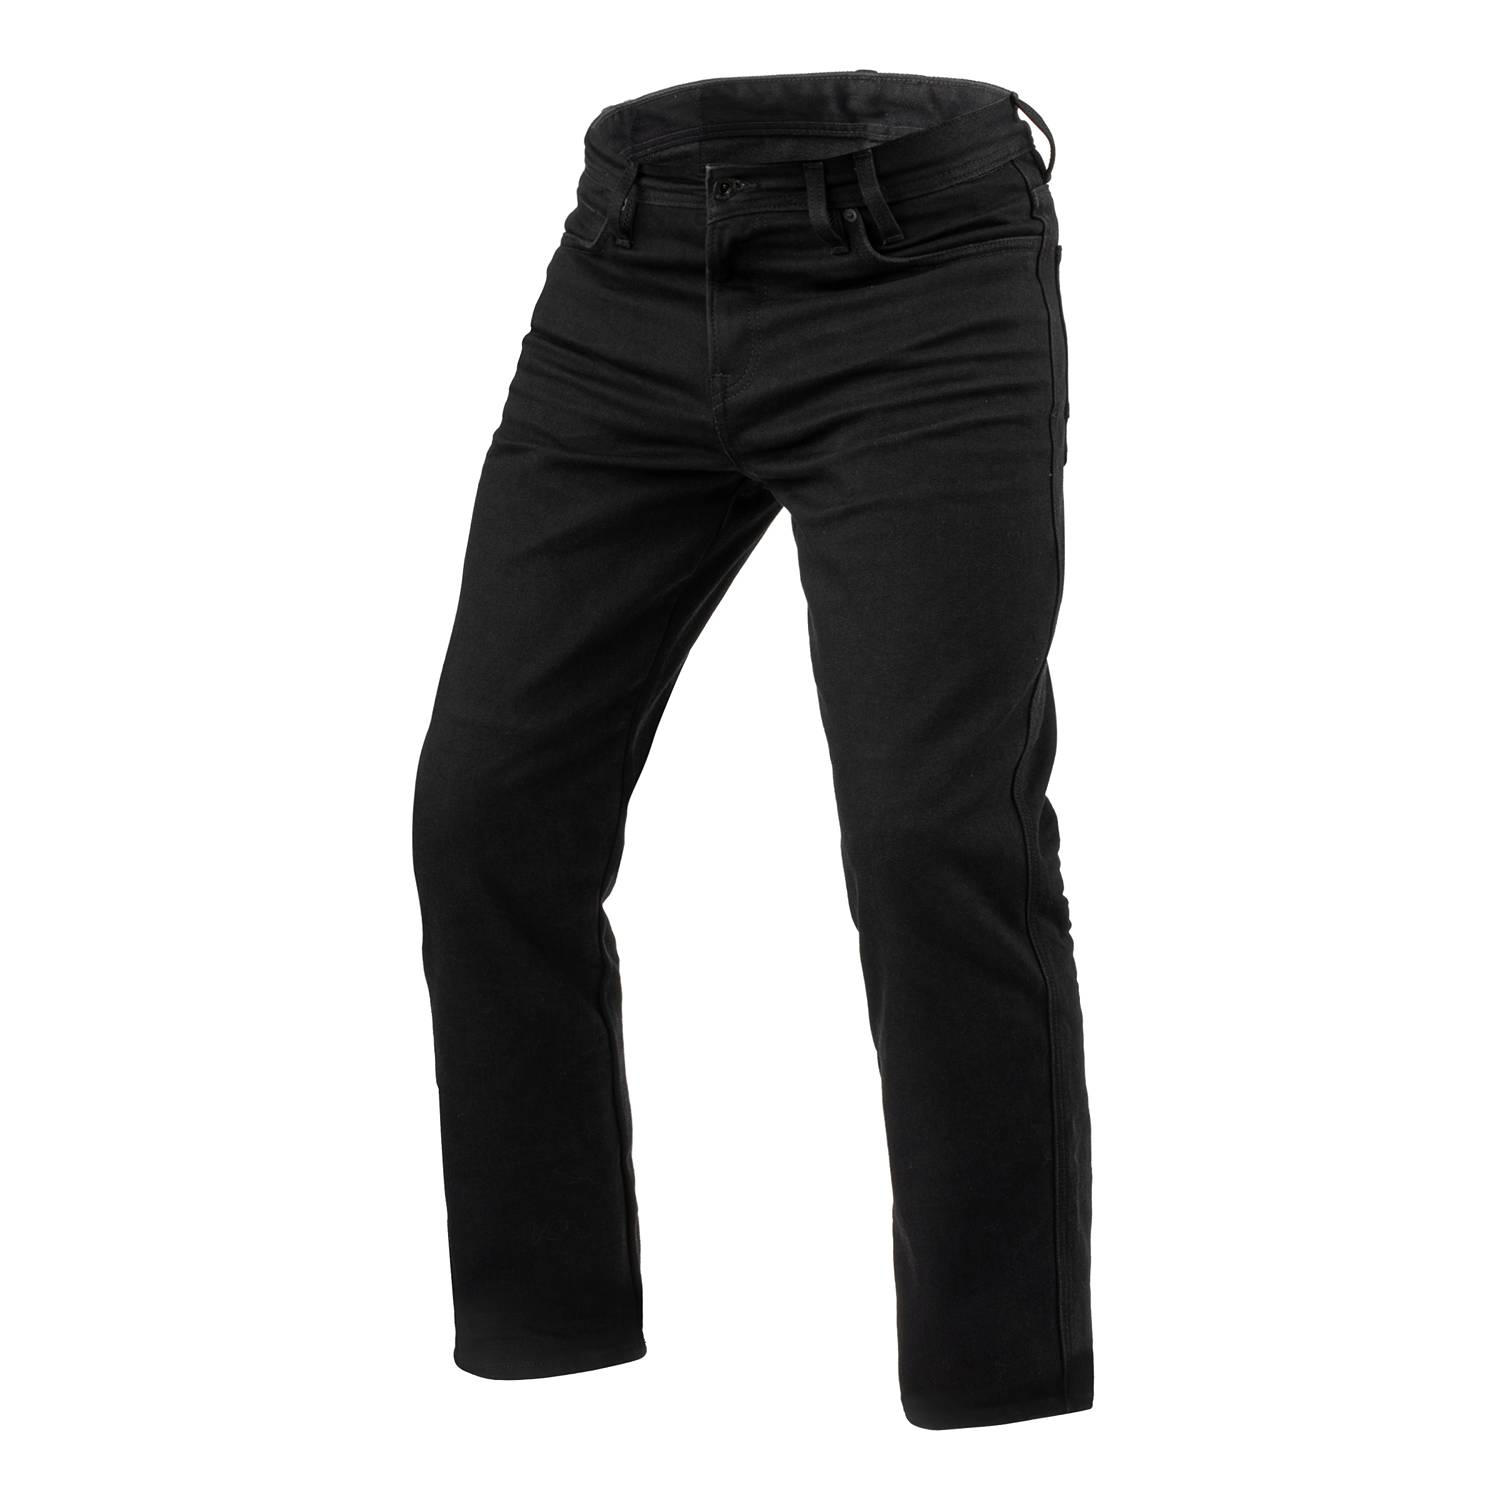 Image of EU REV'IT! Jeans Lombard 3 RF Black L32 Motorcycle Jeans Taille L32/W31